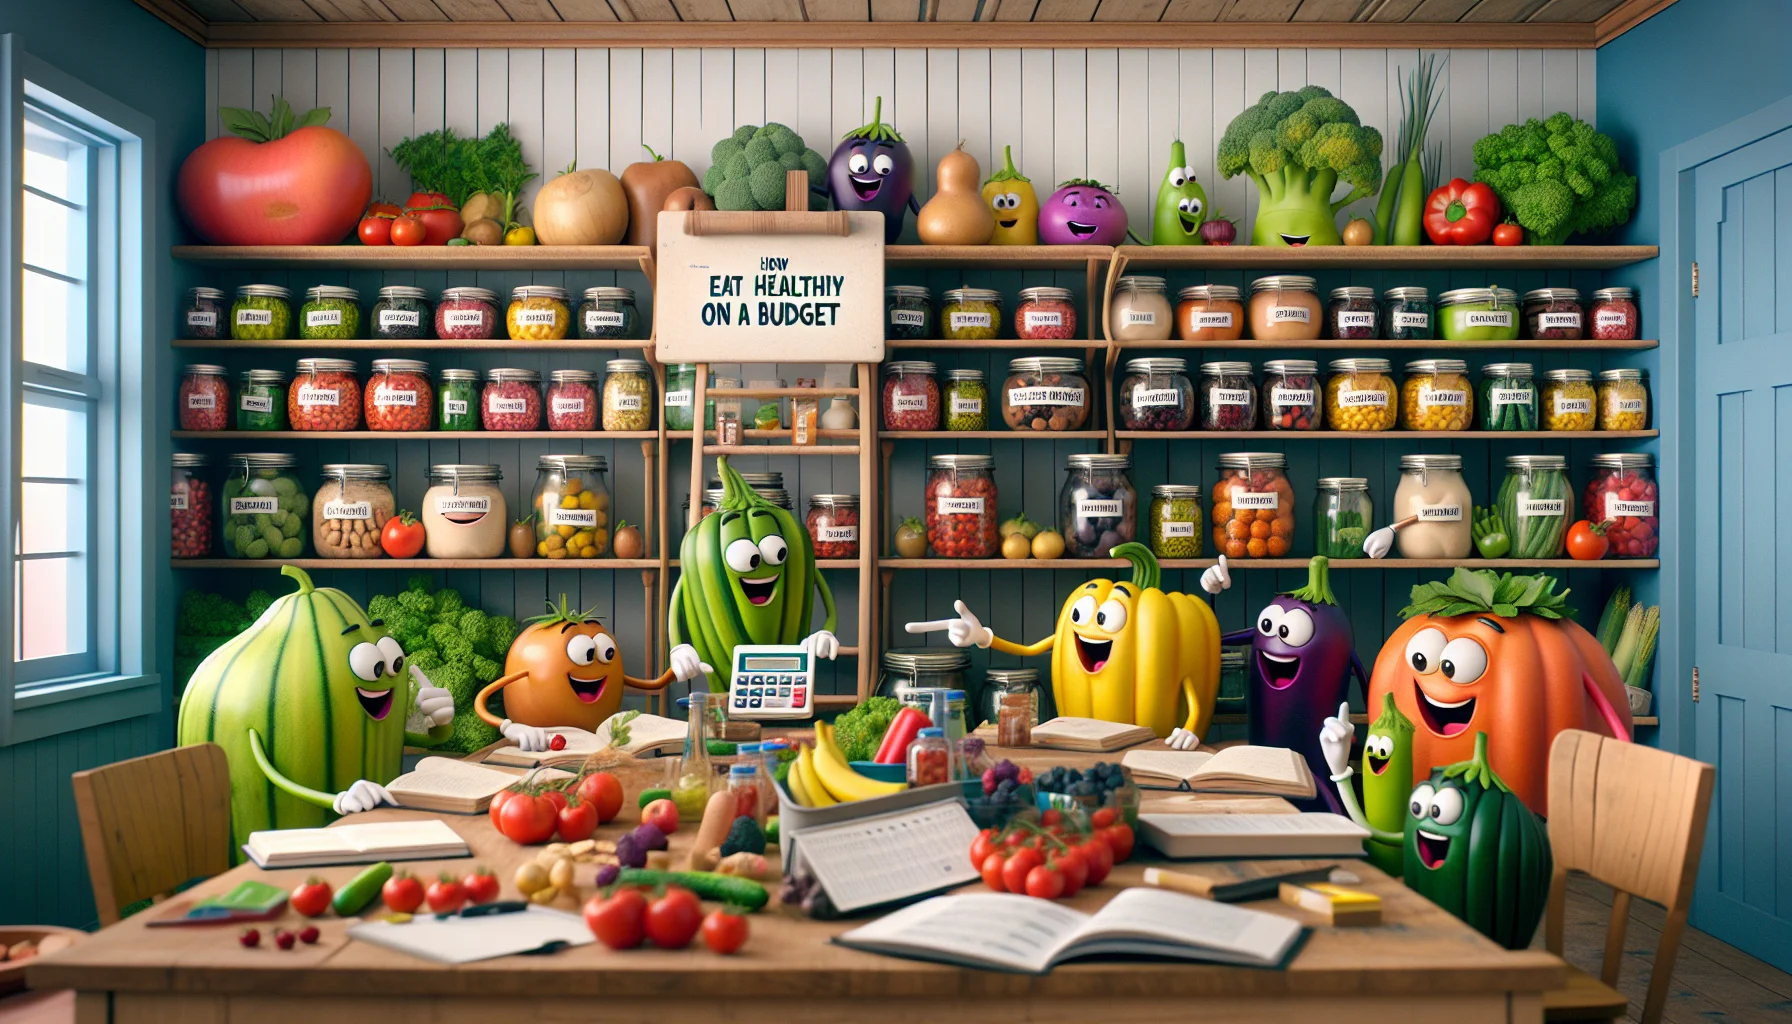 Imagine a lively kitchen scene showcasing an endearing and humorous approach to budget-friendly organization. The shelves are lined with an assortment of jars and containers, each filled with a variety of colorful fruits, vegetables and whole foods. A raucous group of animated vegetables with anthropomorphic features are leading a fun-filled session on how to eat healthily on a budget. They're using oversized calculators, consulting budgeting books, and demonstrating how much money can be saved by choosing fresh, healthy ingredients instead. Encourage a sense of camaraderie, humor and fun in this creative and educational setting.